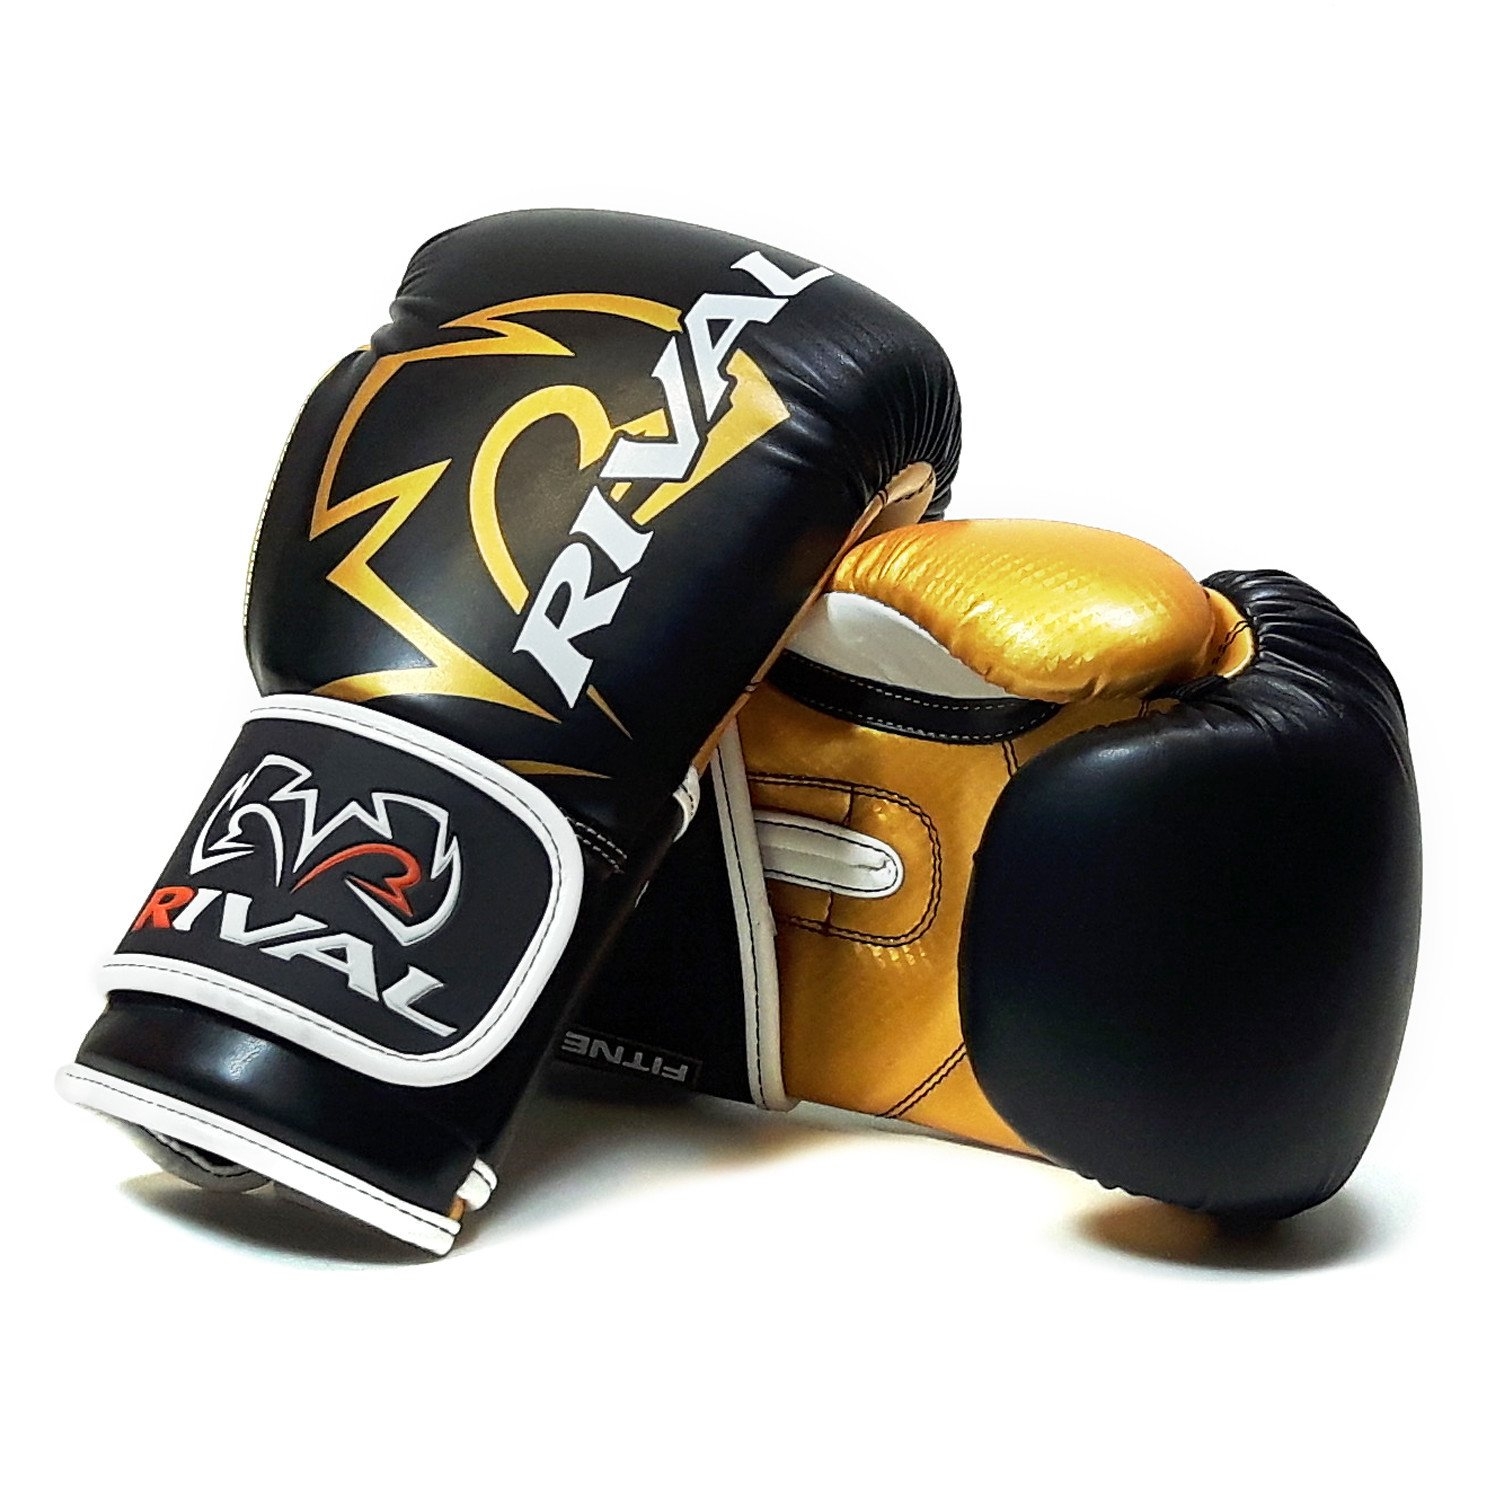 Rival Rb7 Fitness Bag Training Boxing Gloves Black Gold  – Size: 14 – Adult – Unisex